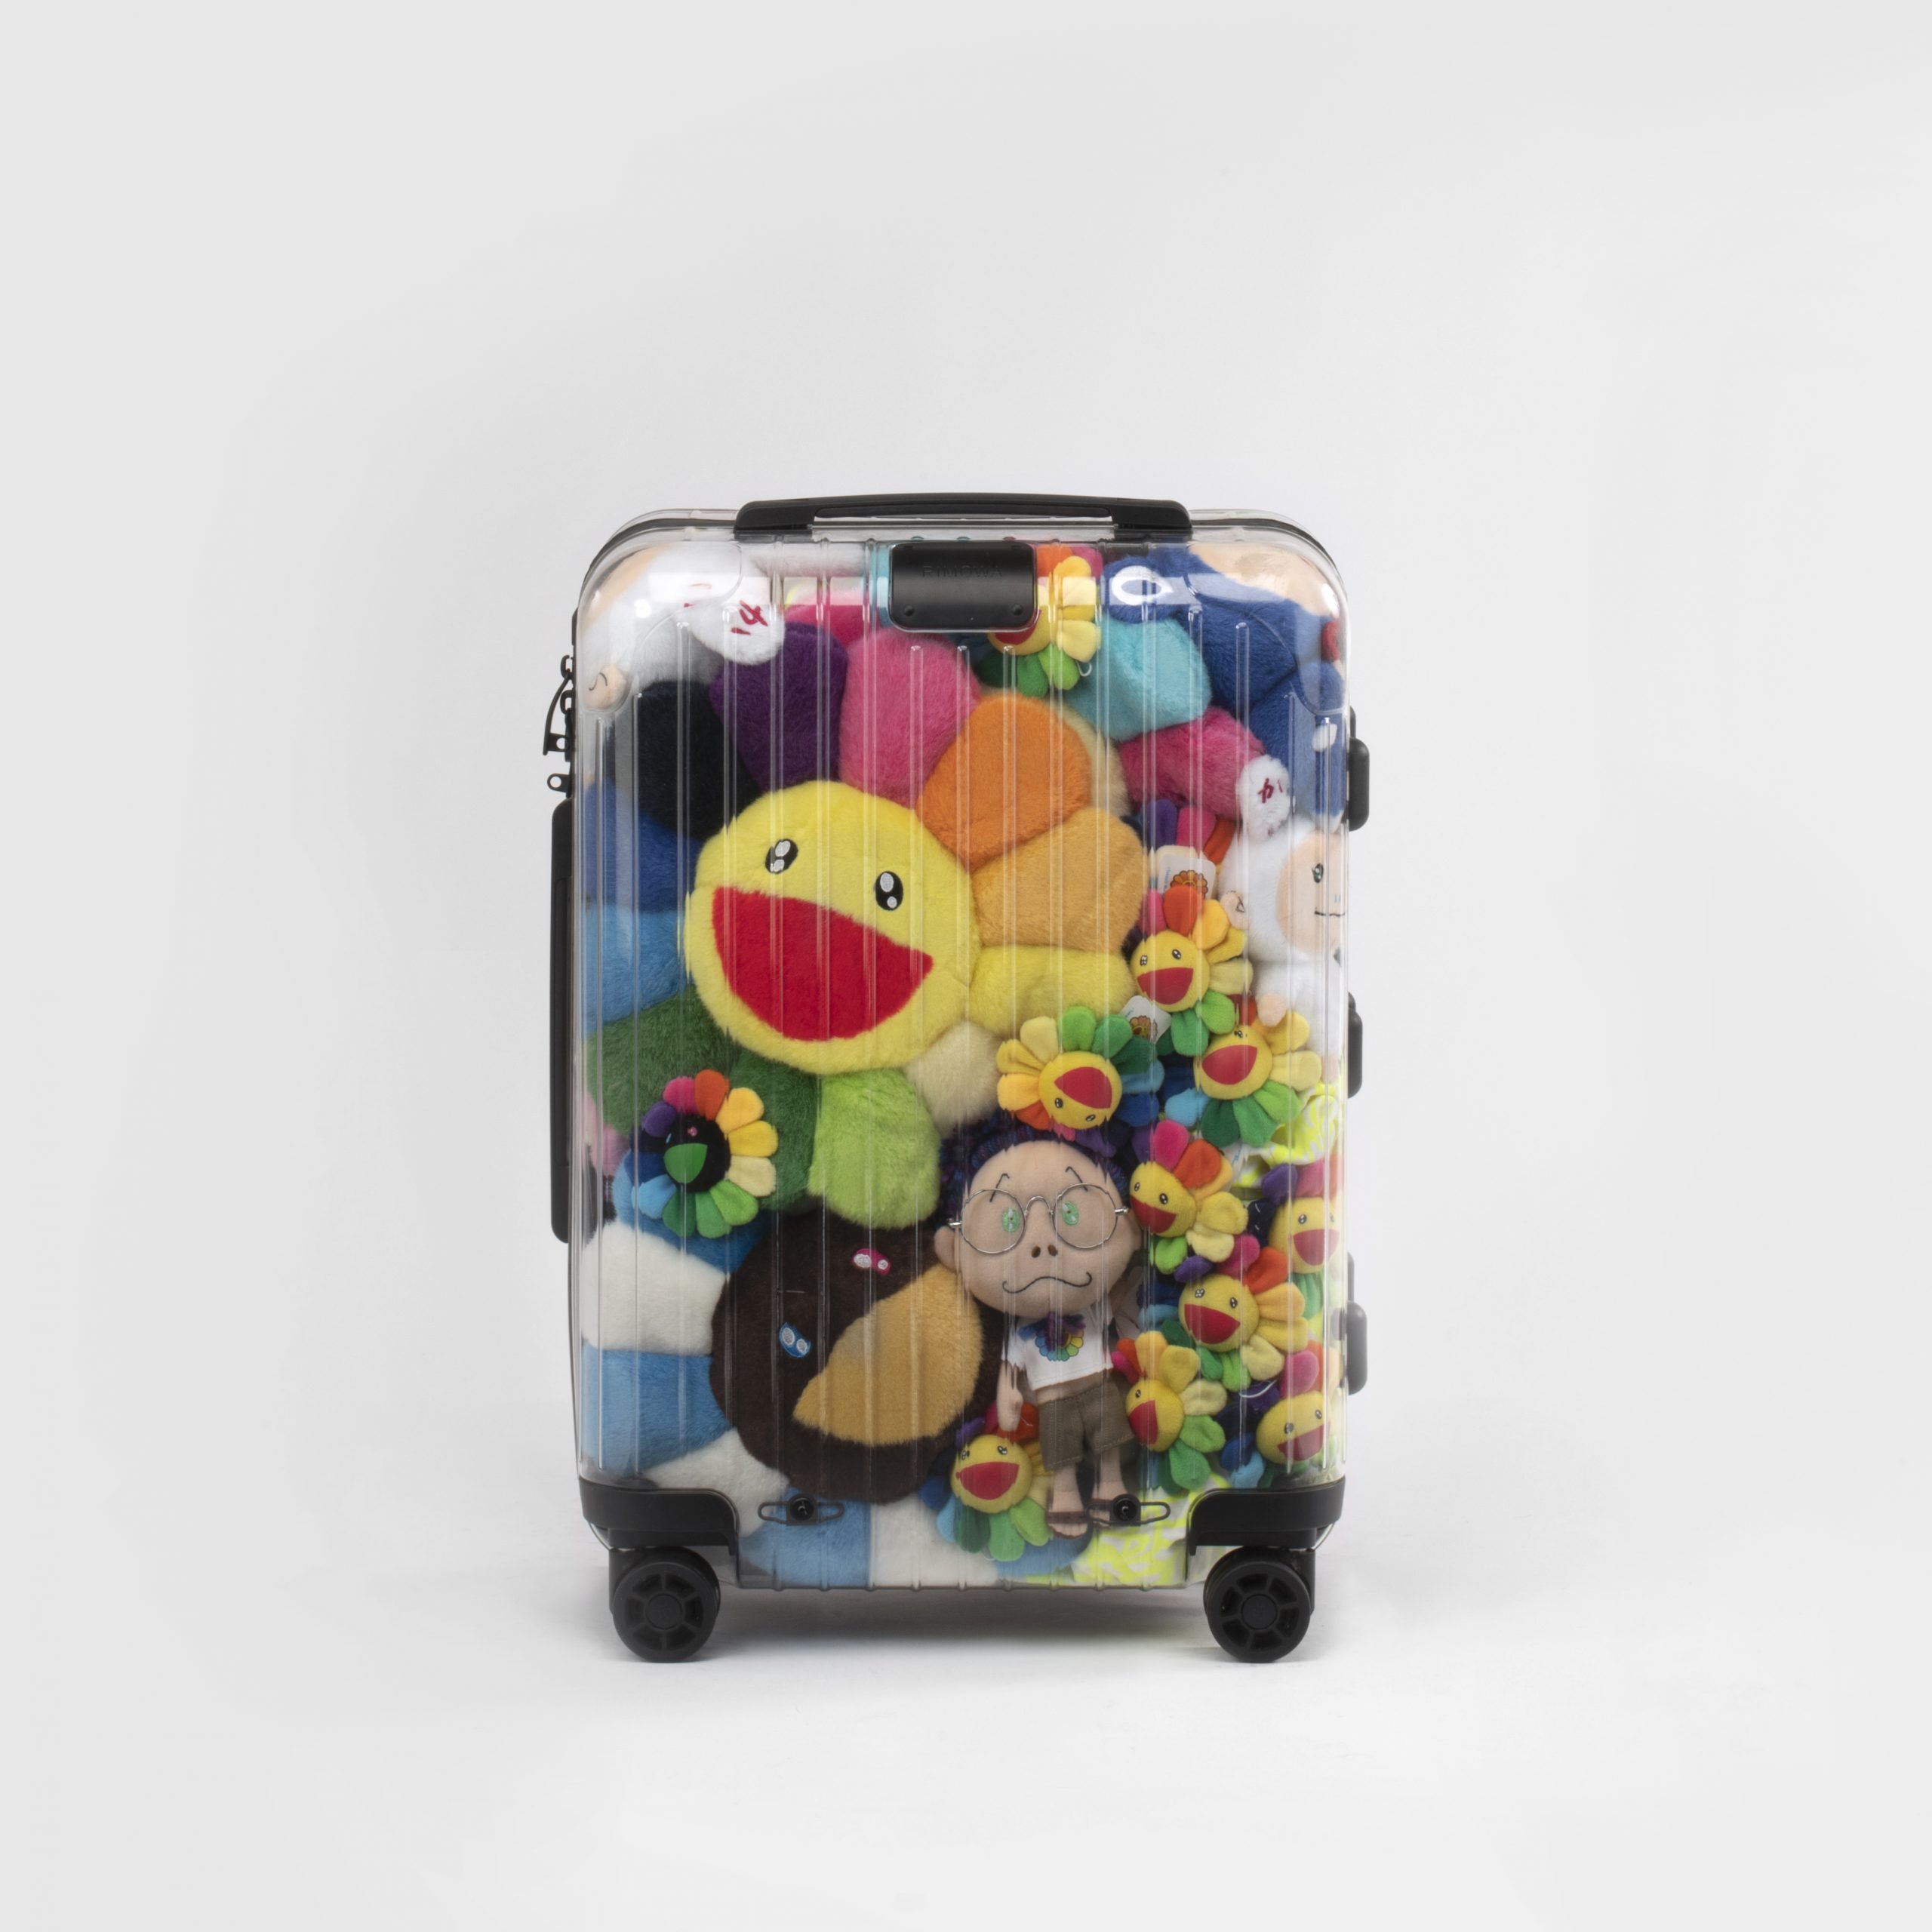 An Innovative Exhibition From Rimowa Lands in New York to 